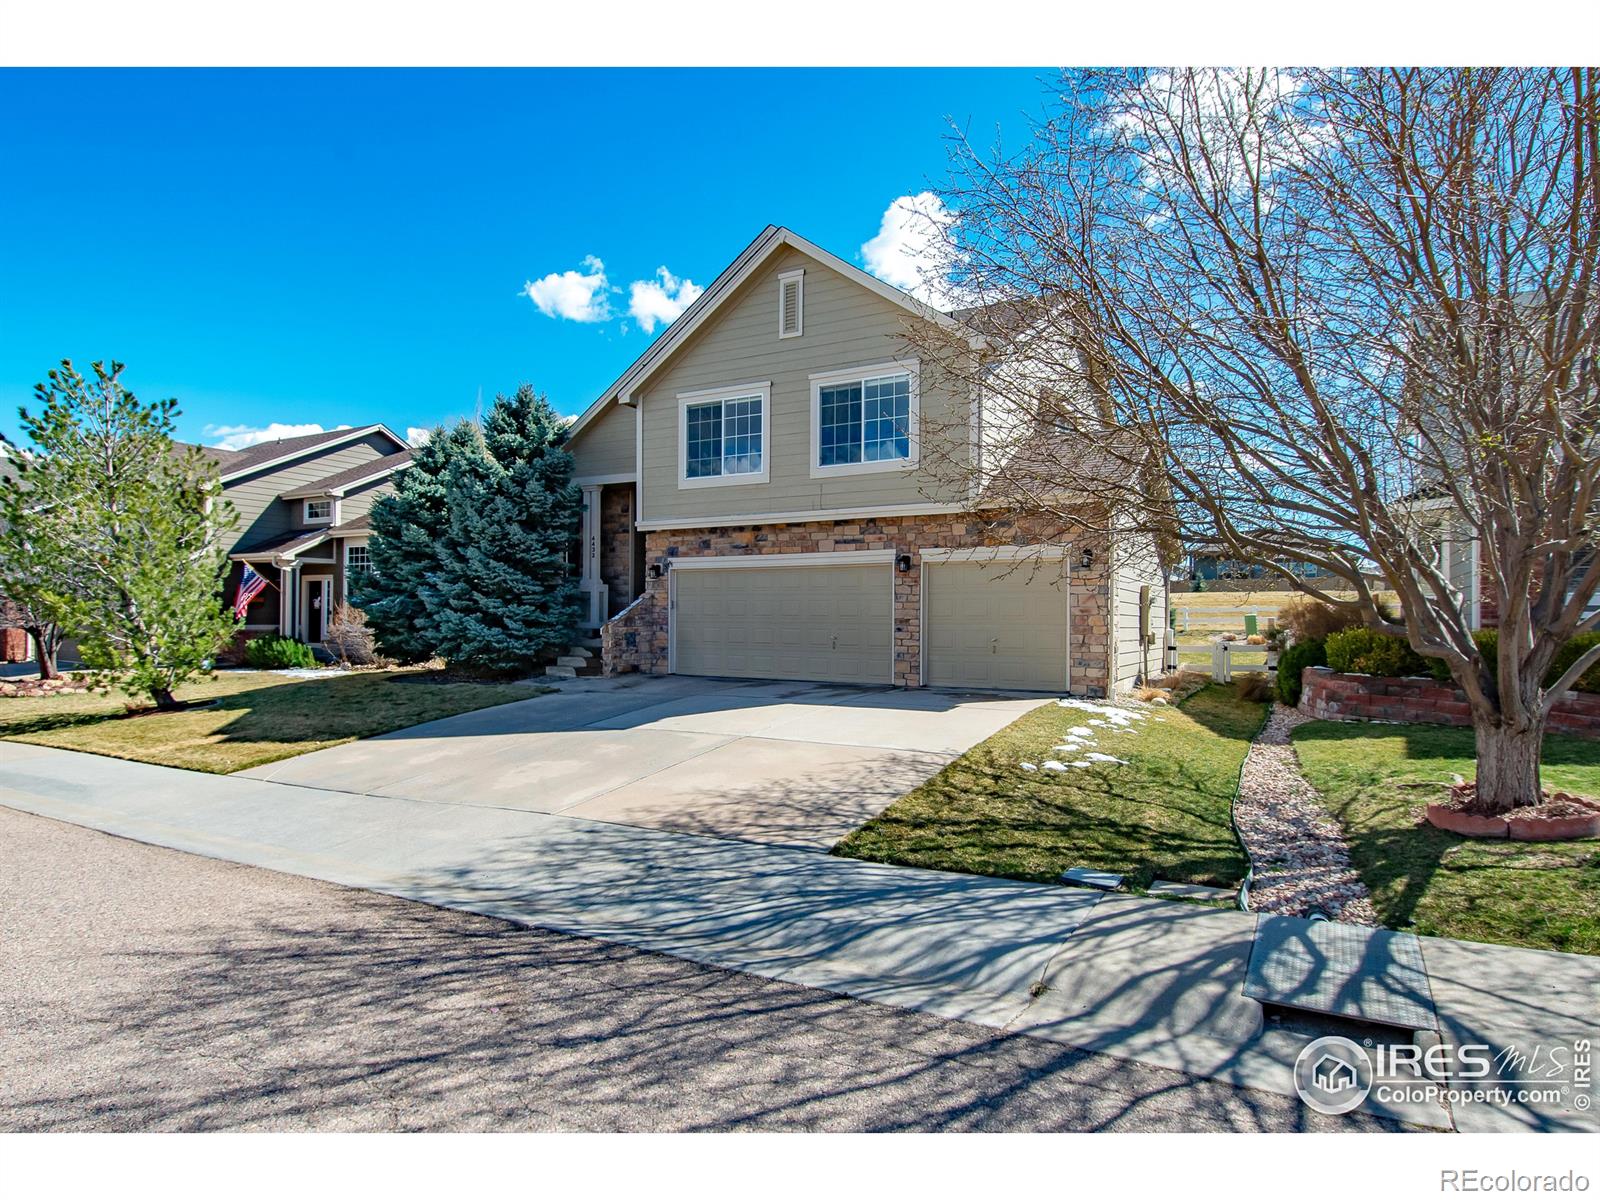 4432  pika drive, Loveland sold home. Closed on 2024-04-29 for $590,000.